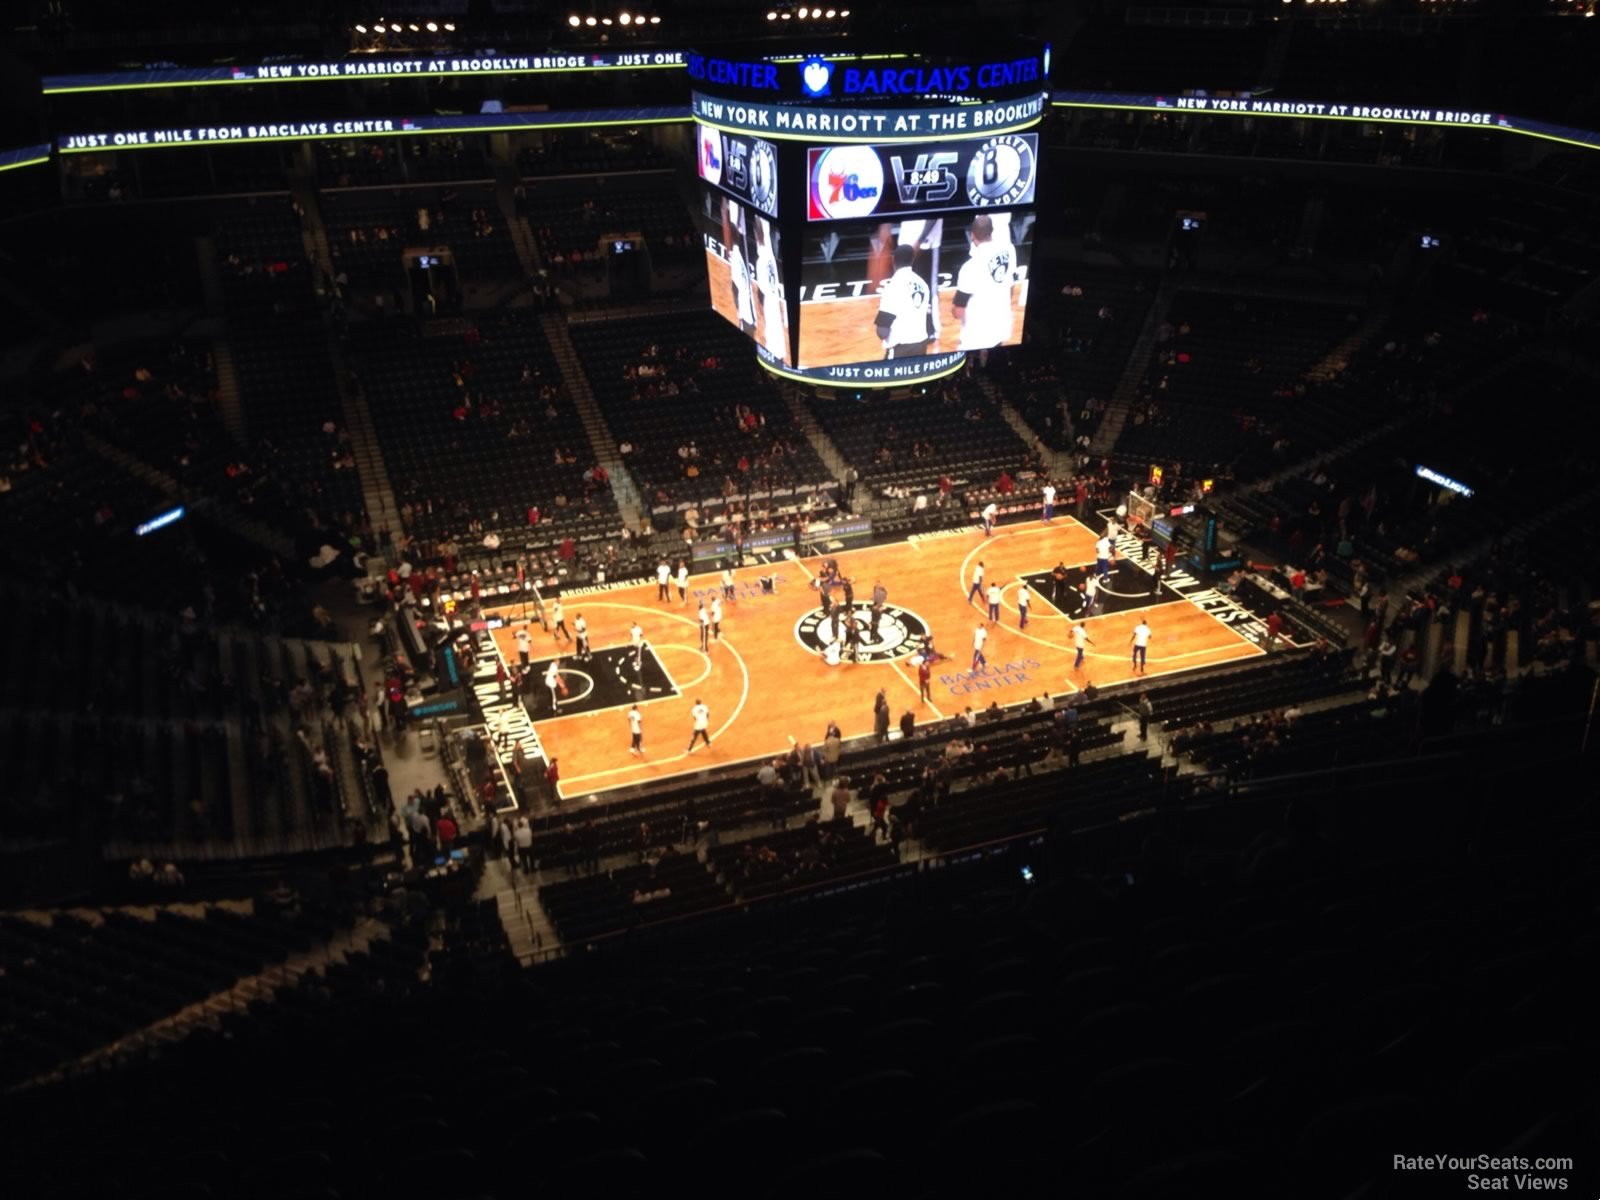 section 226, row 14 seat view  for basketball - barclays center